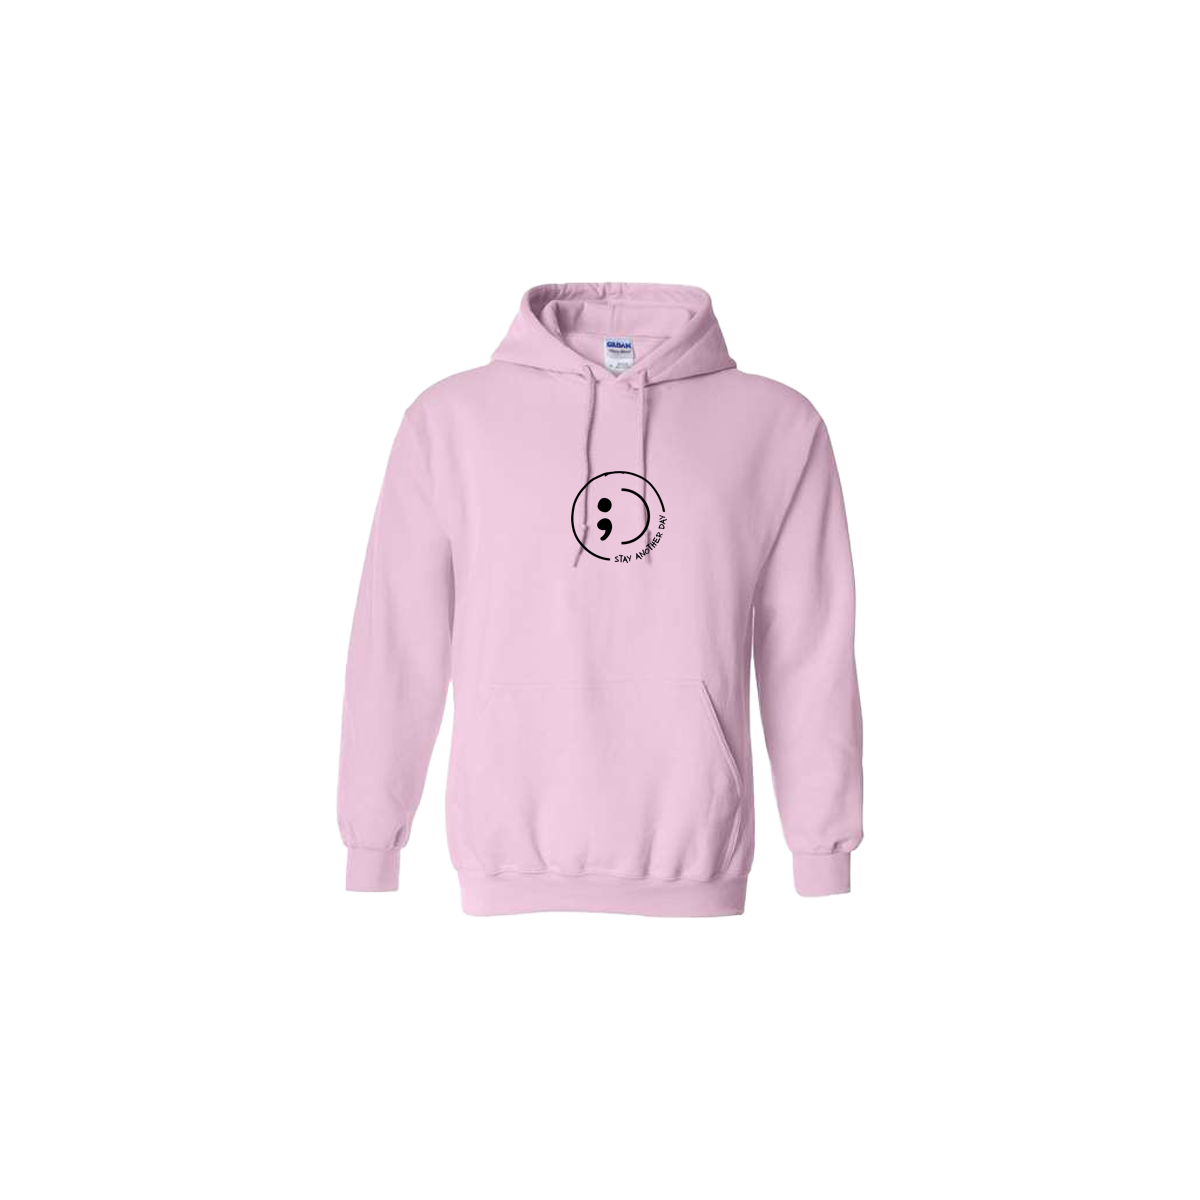 Stay Another Day Smiley with text Embroidered Light Pink Hoodie - Mental Health Awareness Clothing